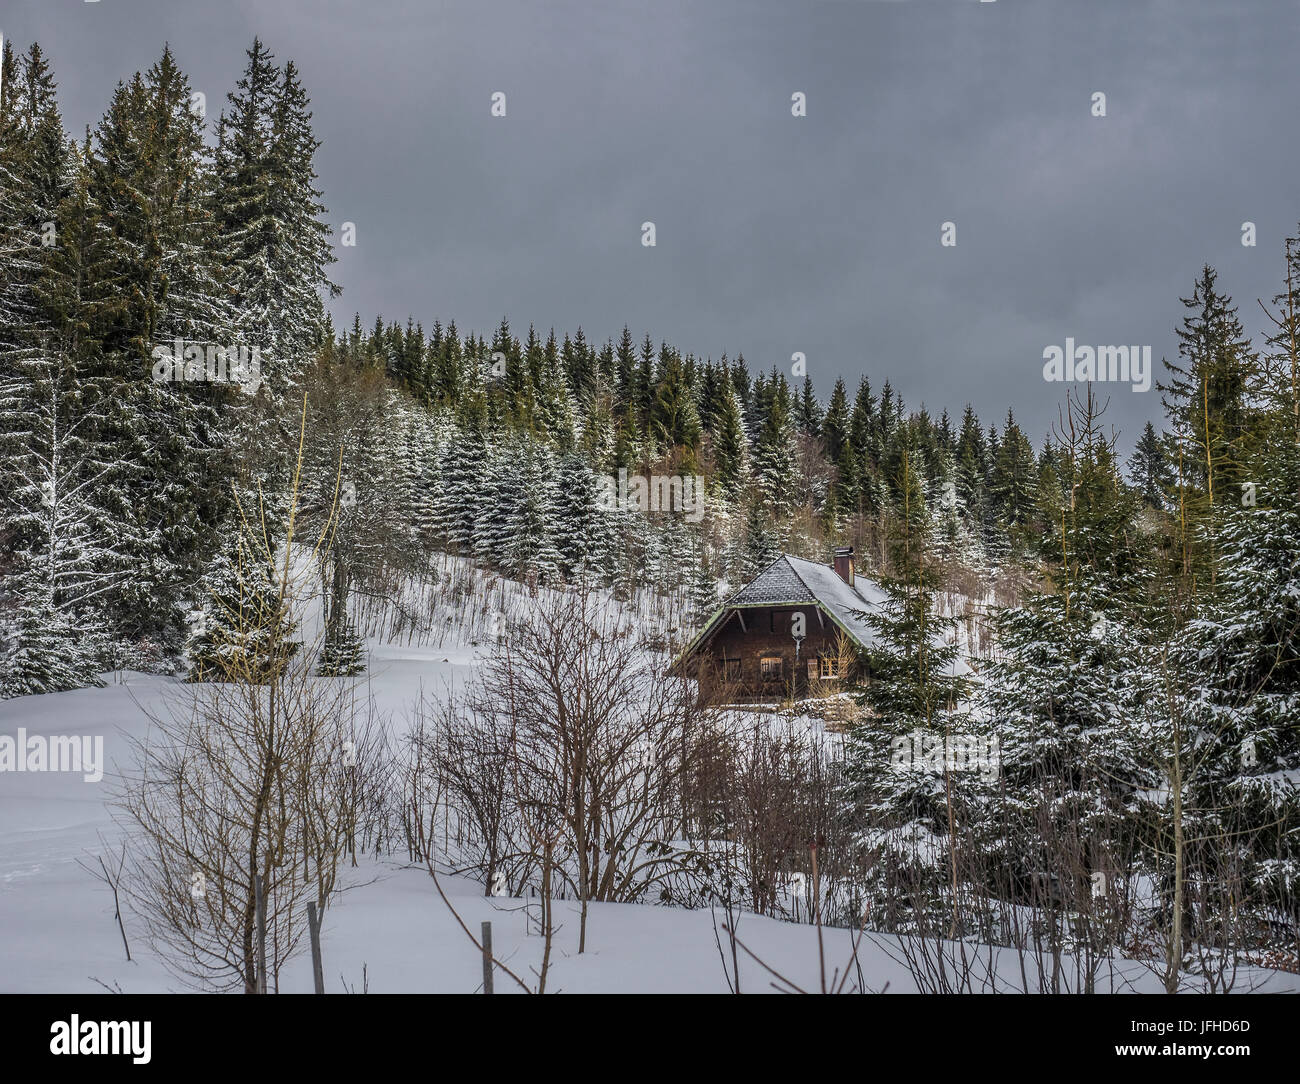 Log cabin on snowcapped mountain by coniferous trees against sky Stock Photo